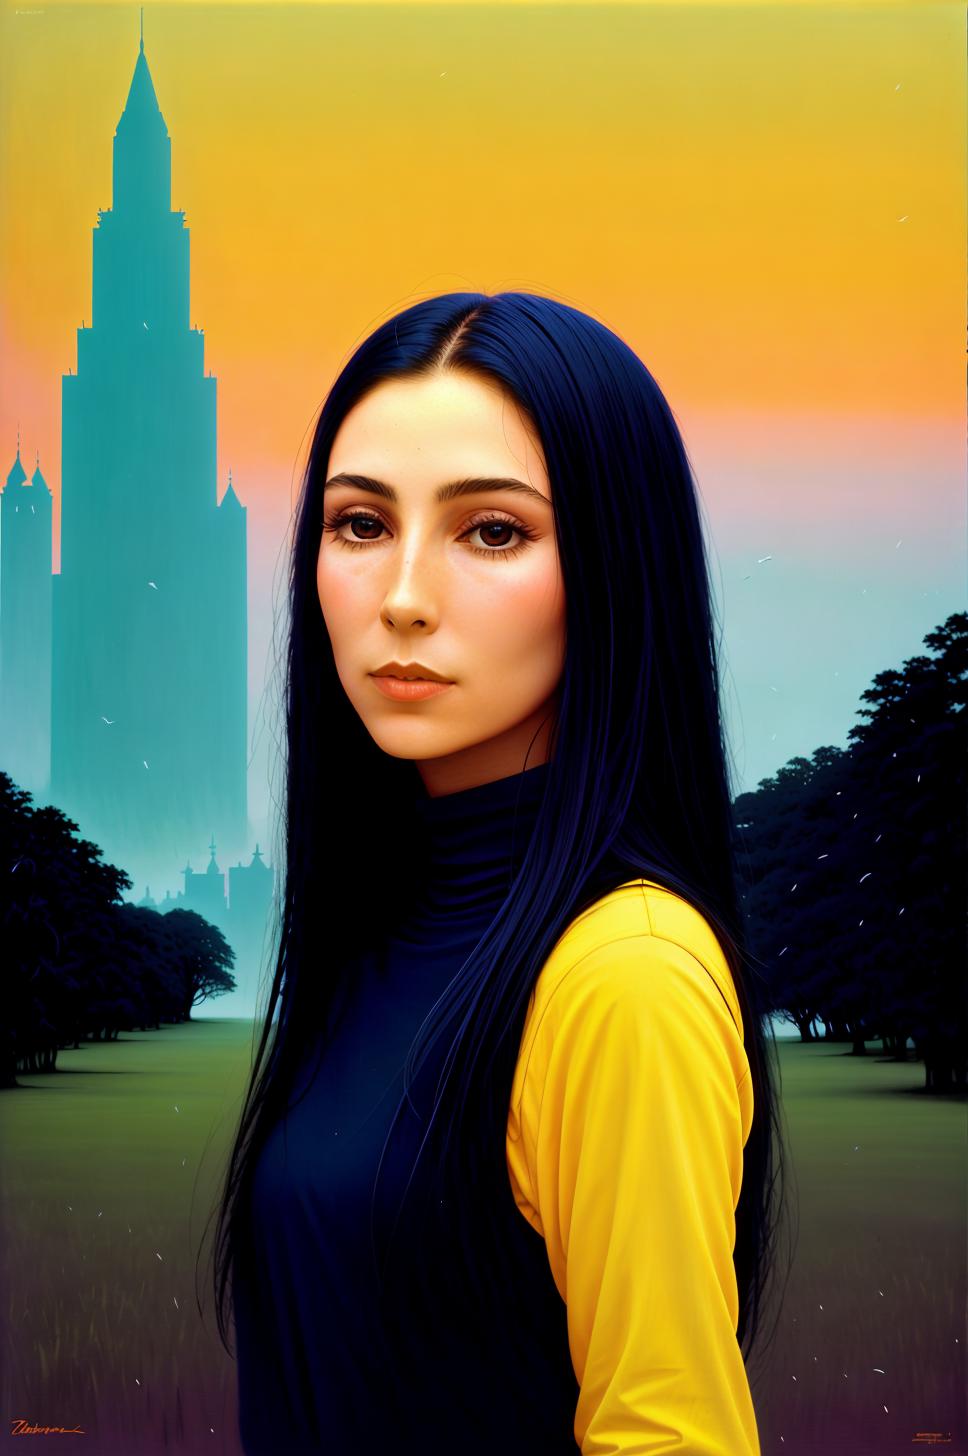 Cher - 70s image by ArtificeArthouse